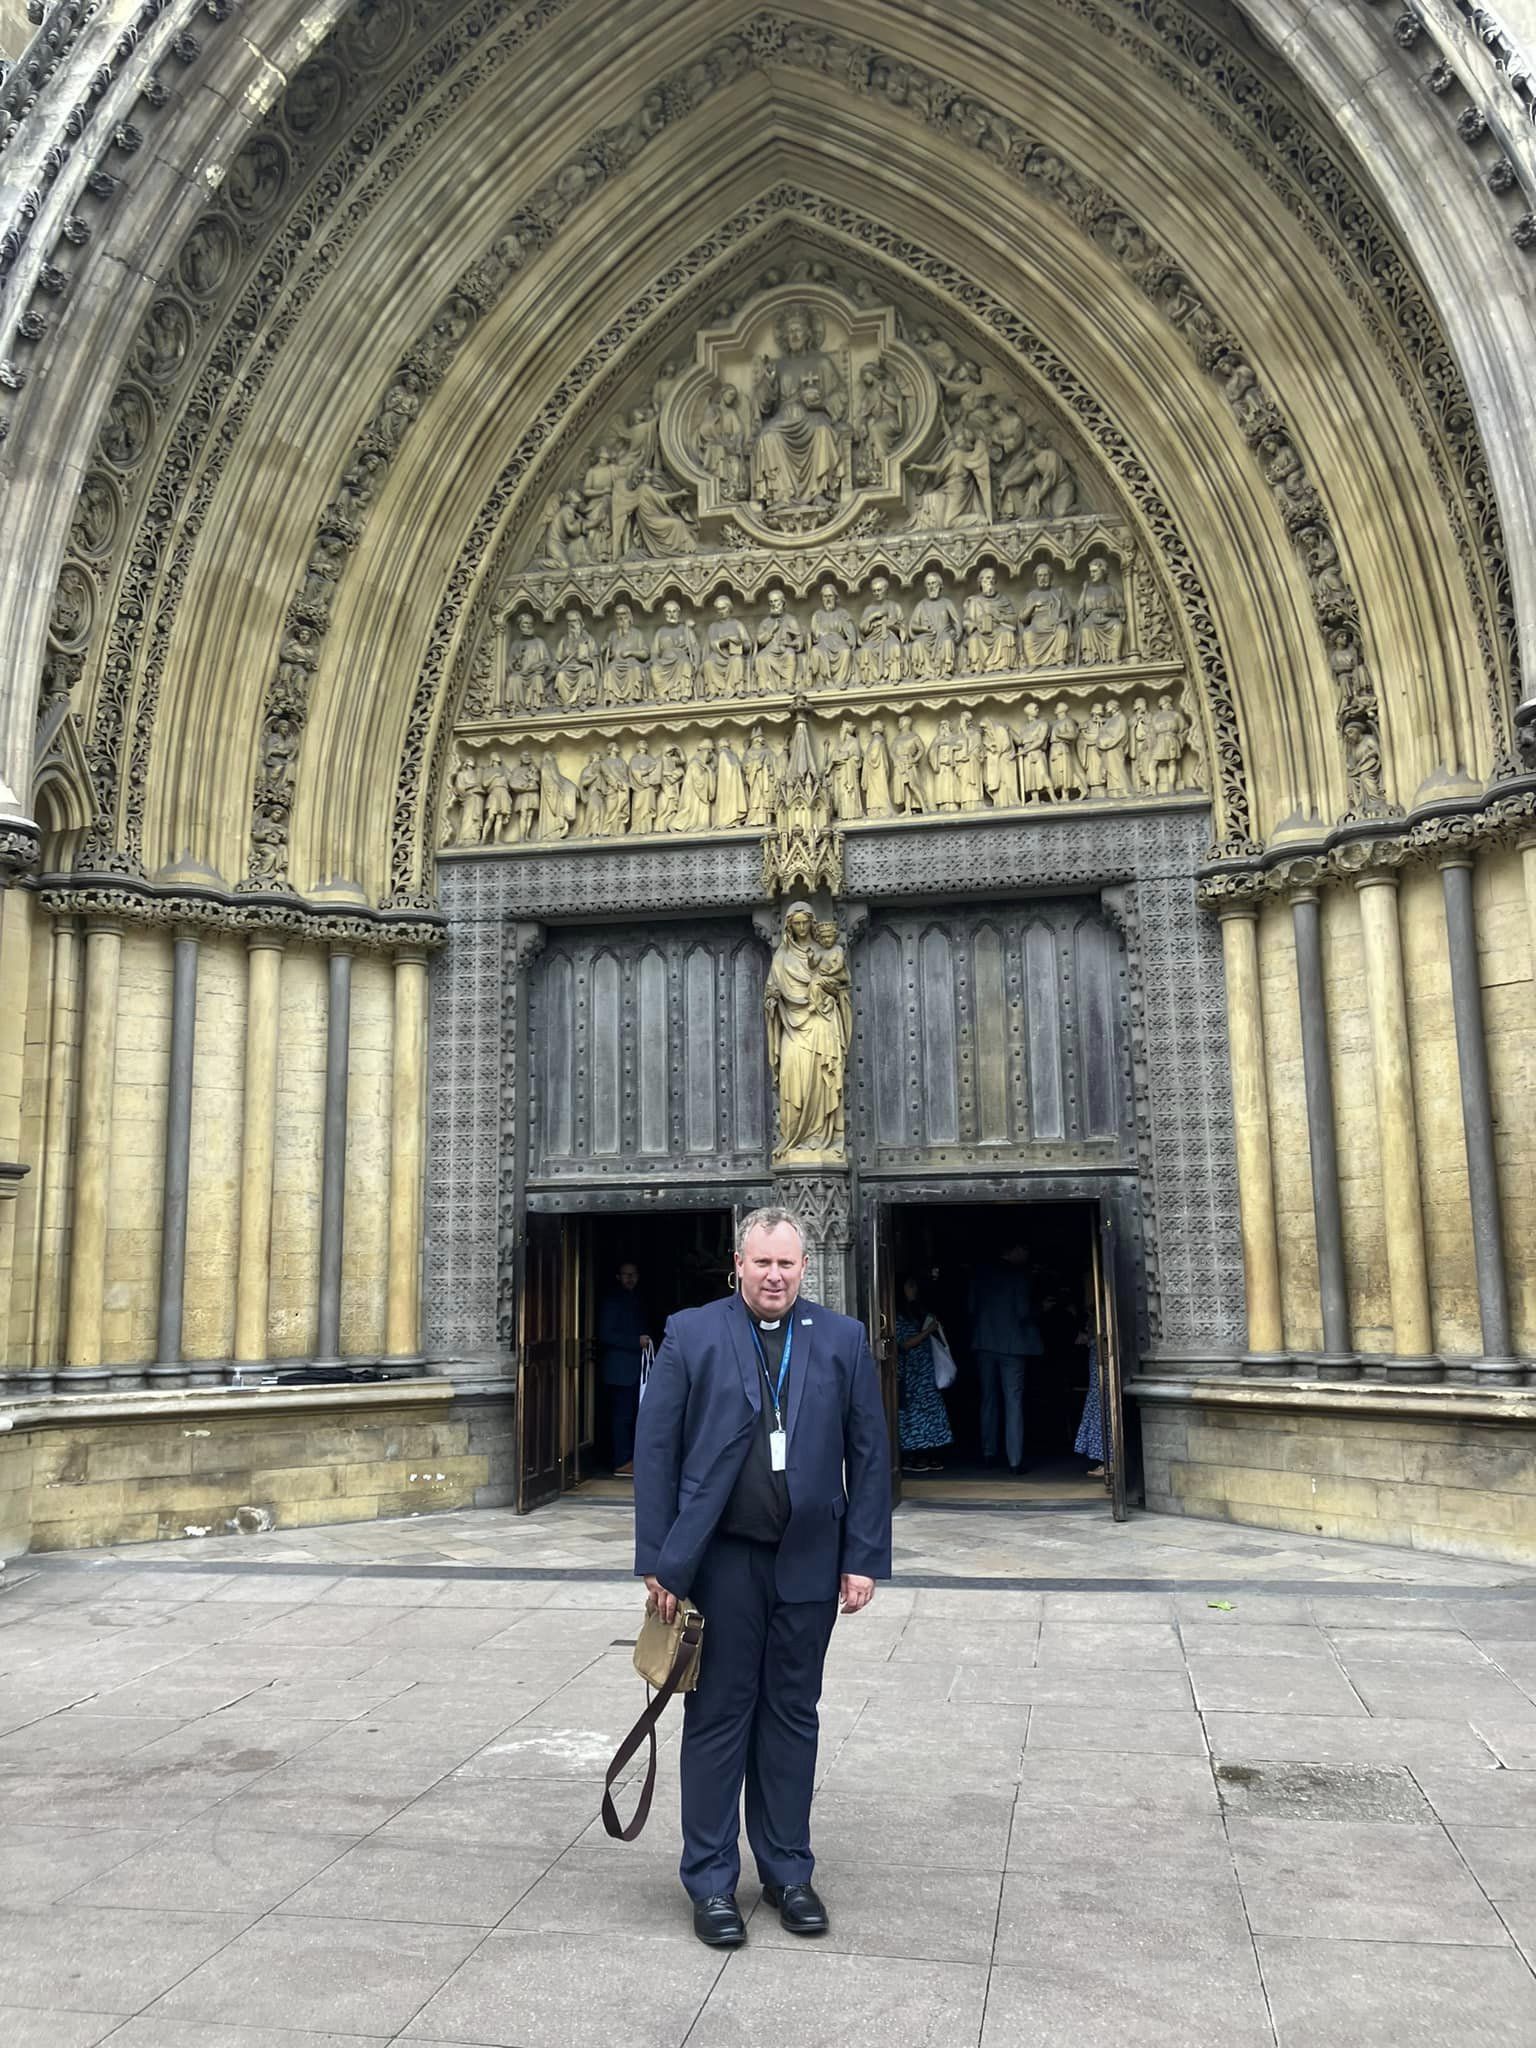 A special visit to Westminster Abbey for NHS75